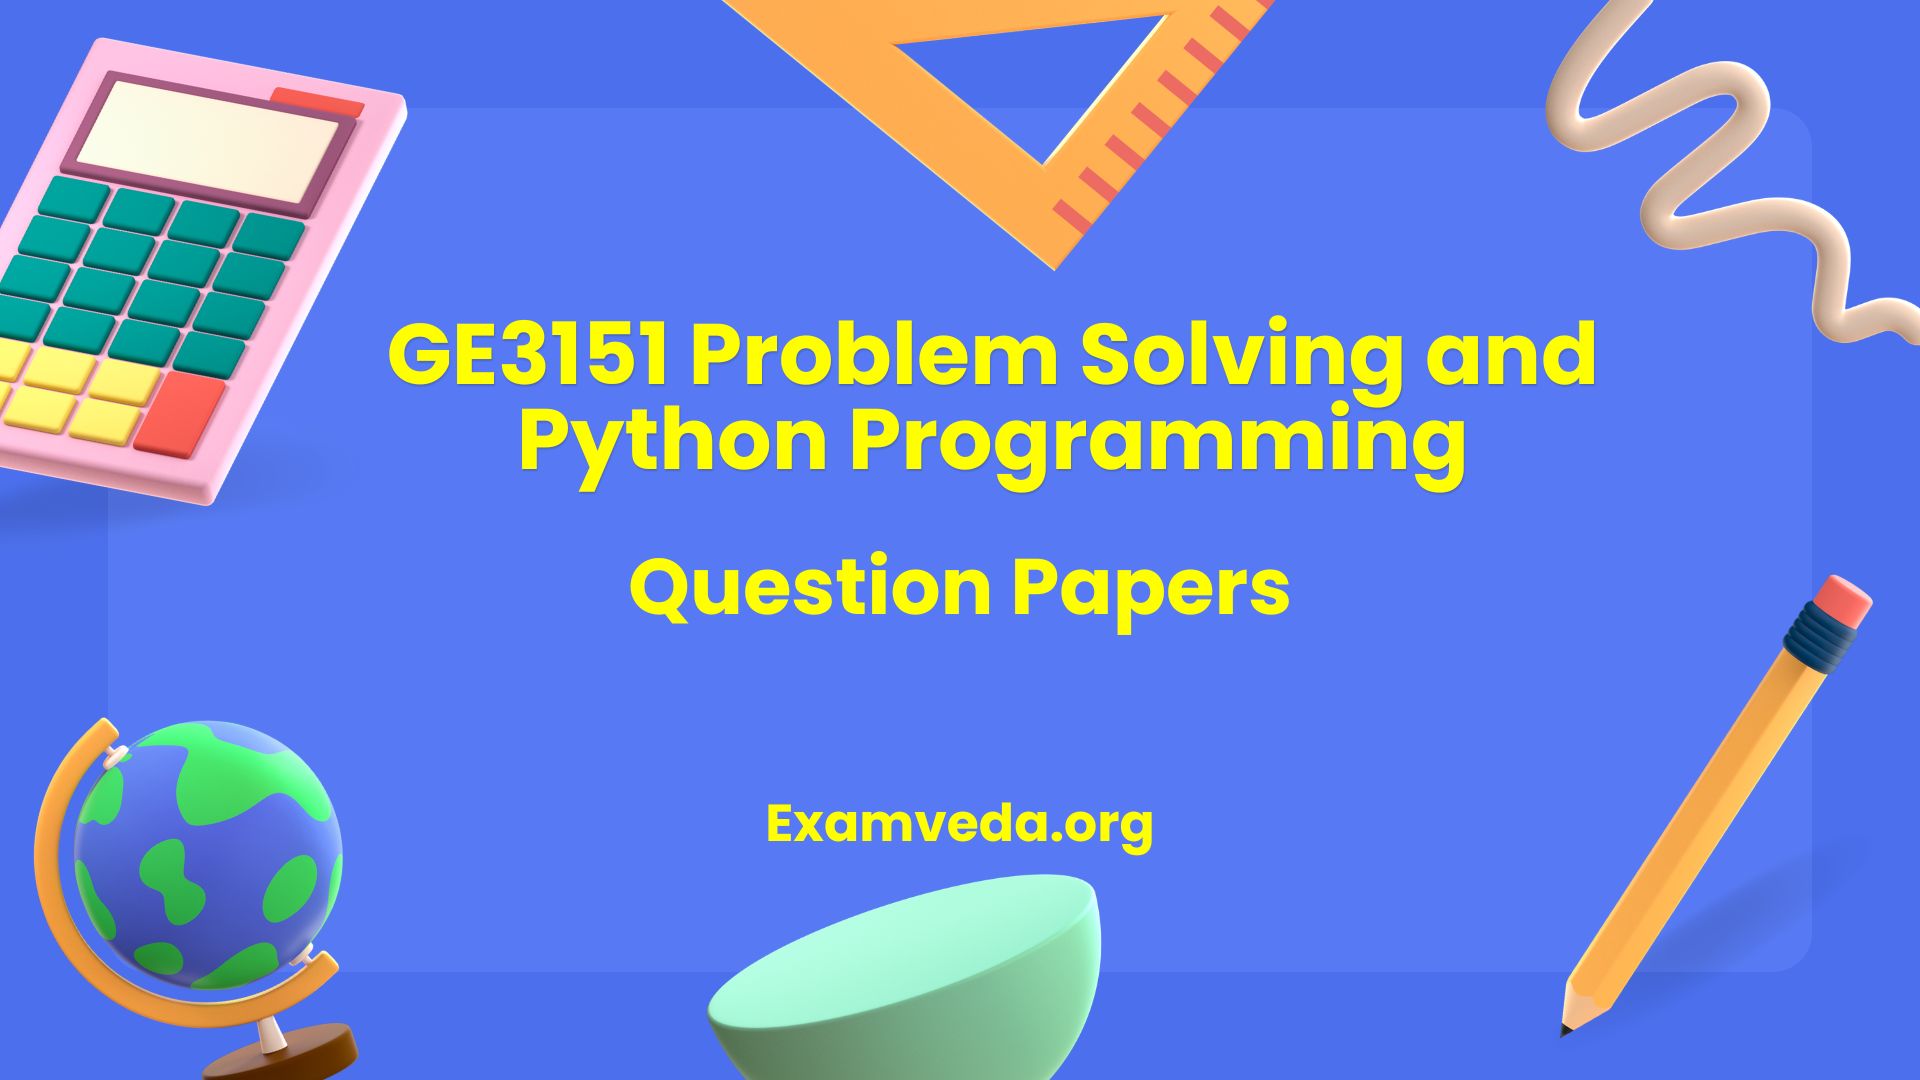 GE3151 Problem Solving and Python Programming Question Papers